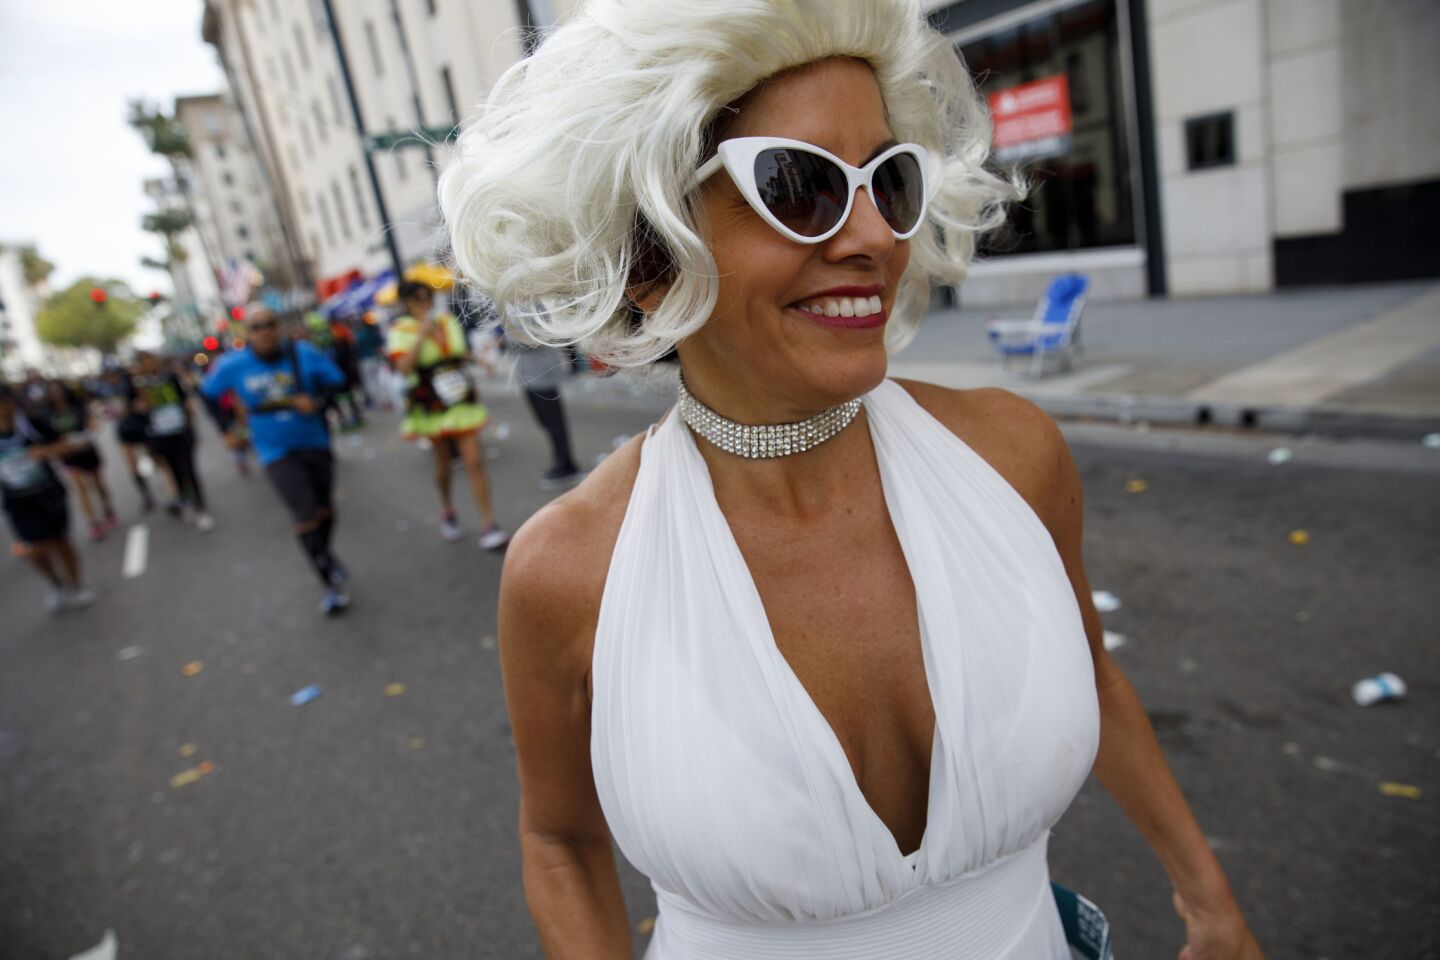 An Marilyn Monroe impersonator runs past mile 17 in the L.A. Marathon in Beverly Hills.